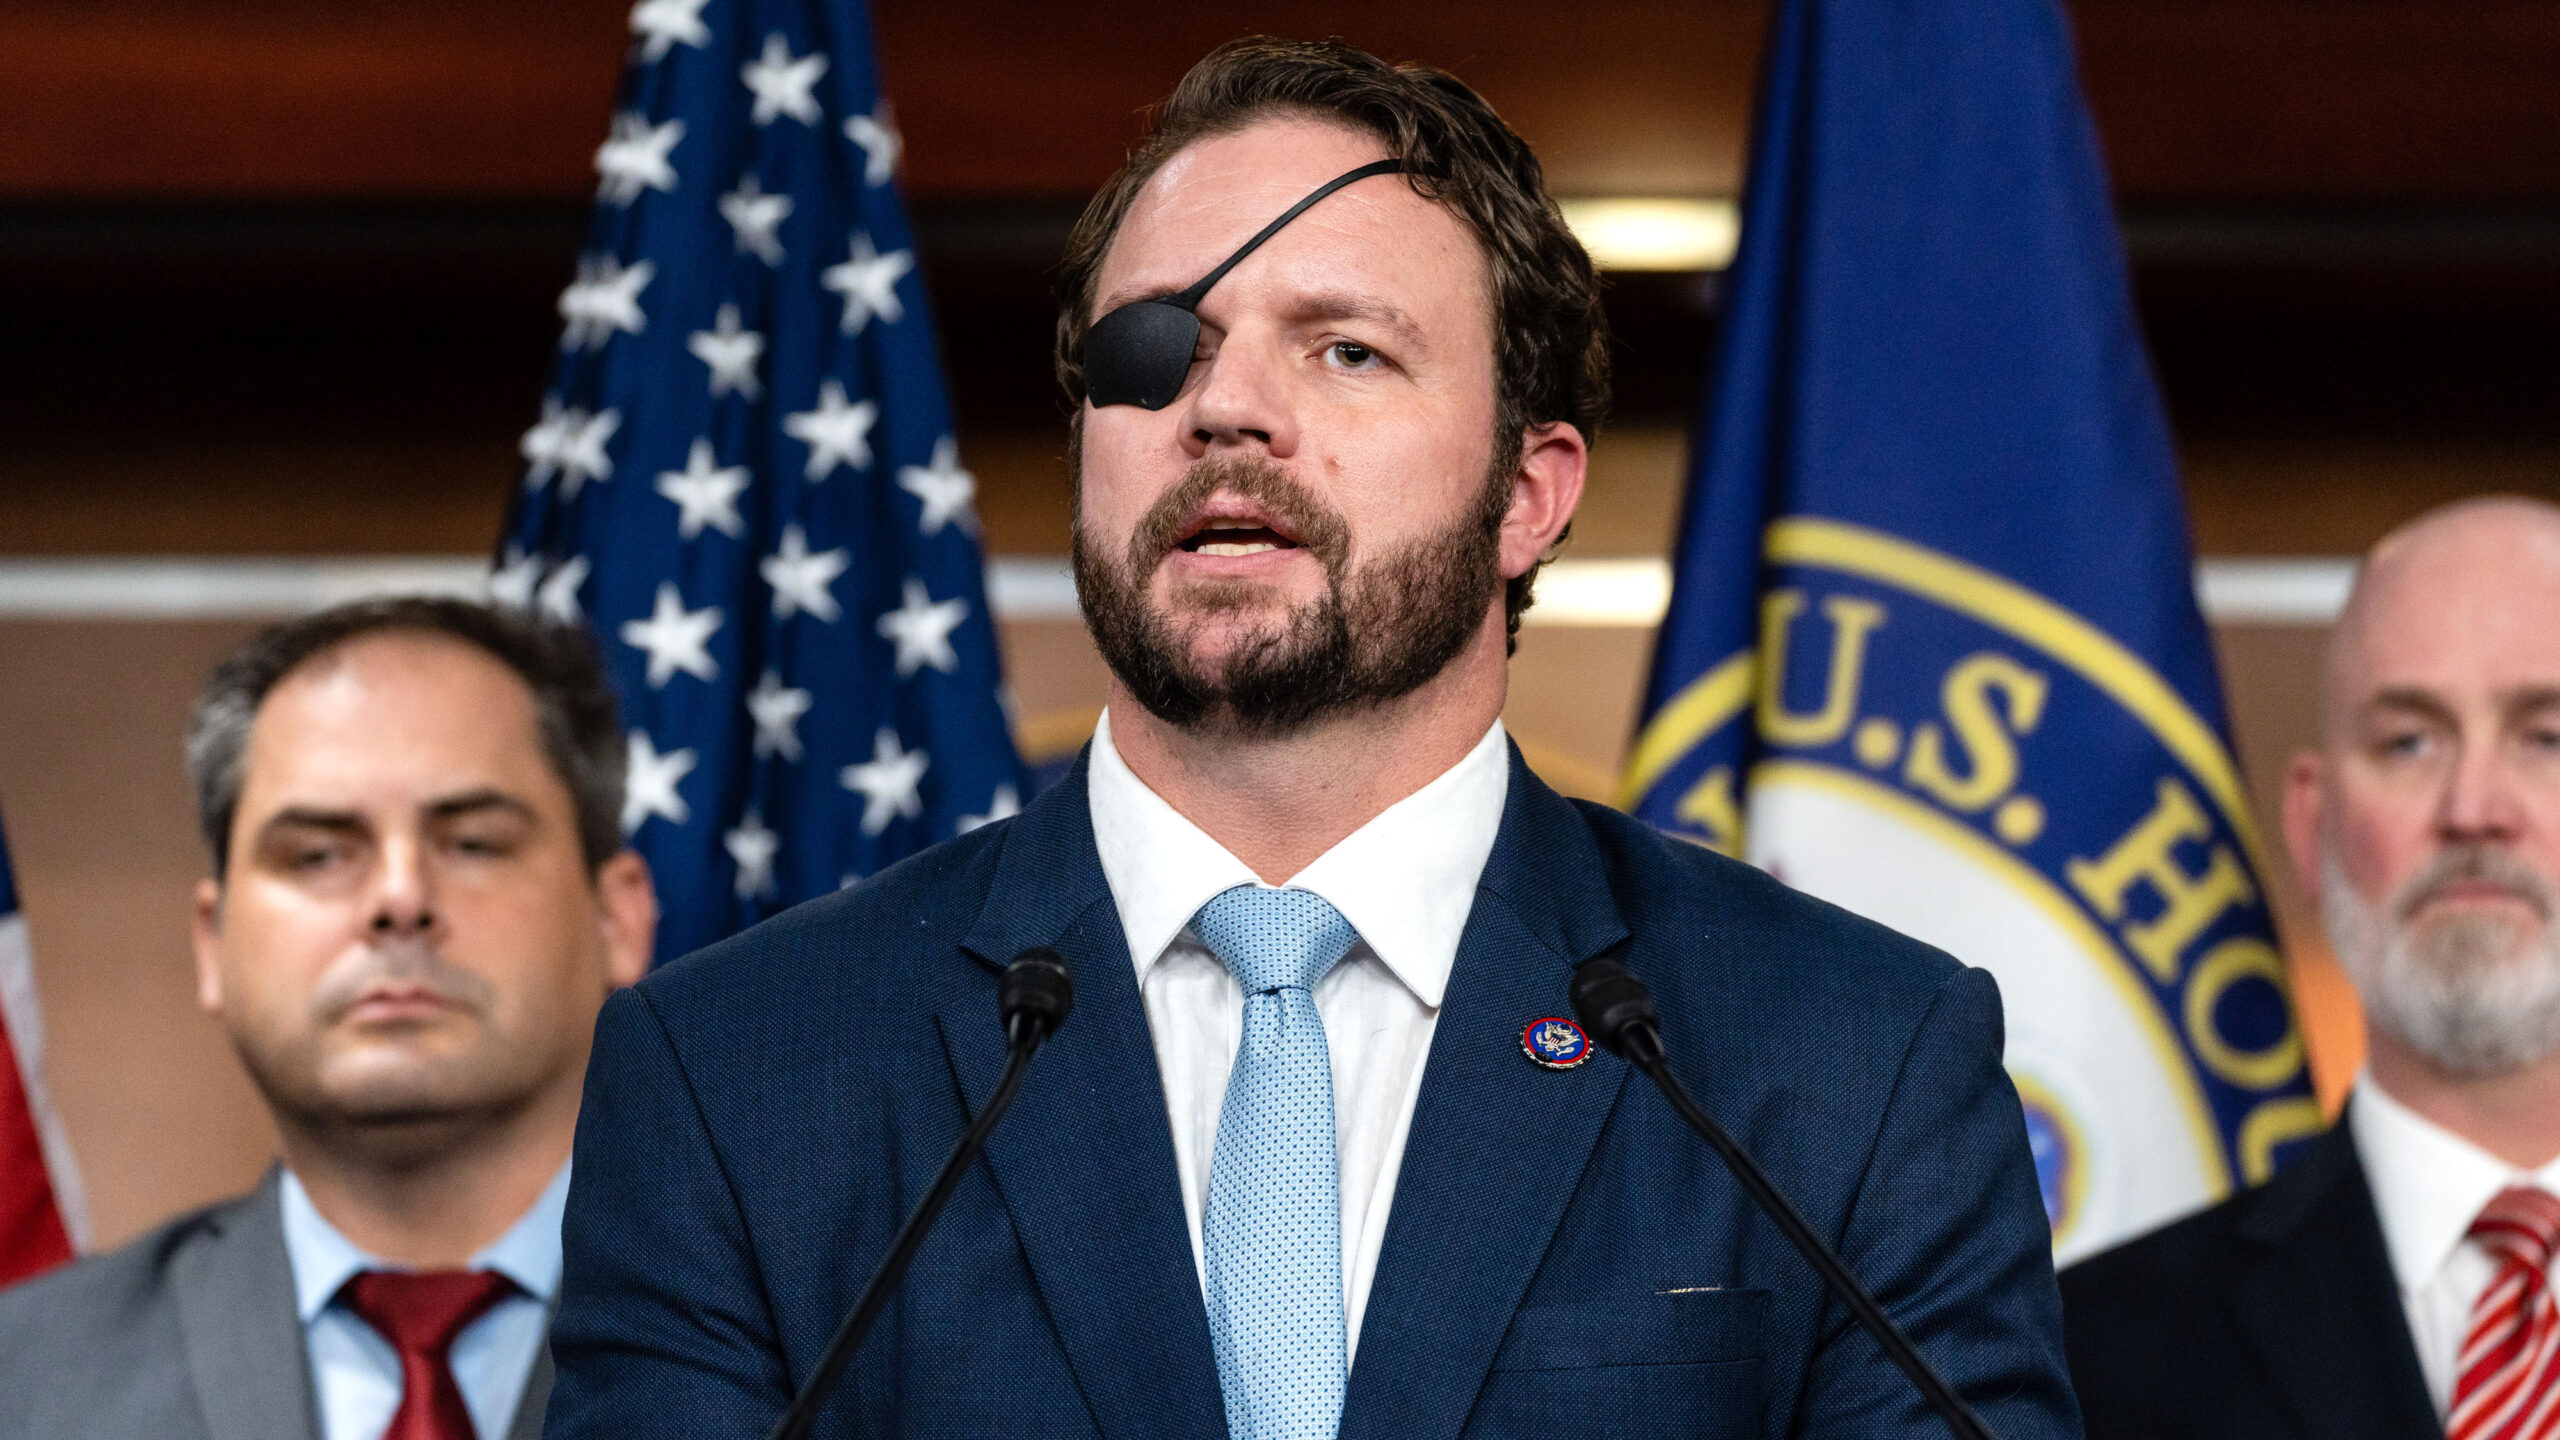 Congressman Dan Crenshaw has asserted that the comments made by Mexico's leftist president demonstrate that he has been "procured by the criminal gangs"